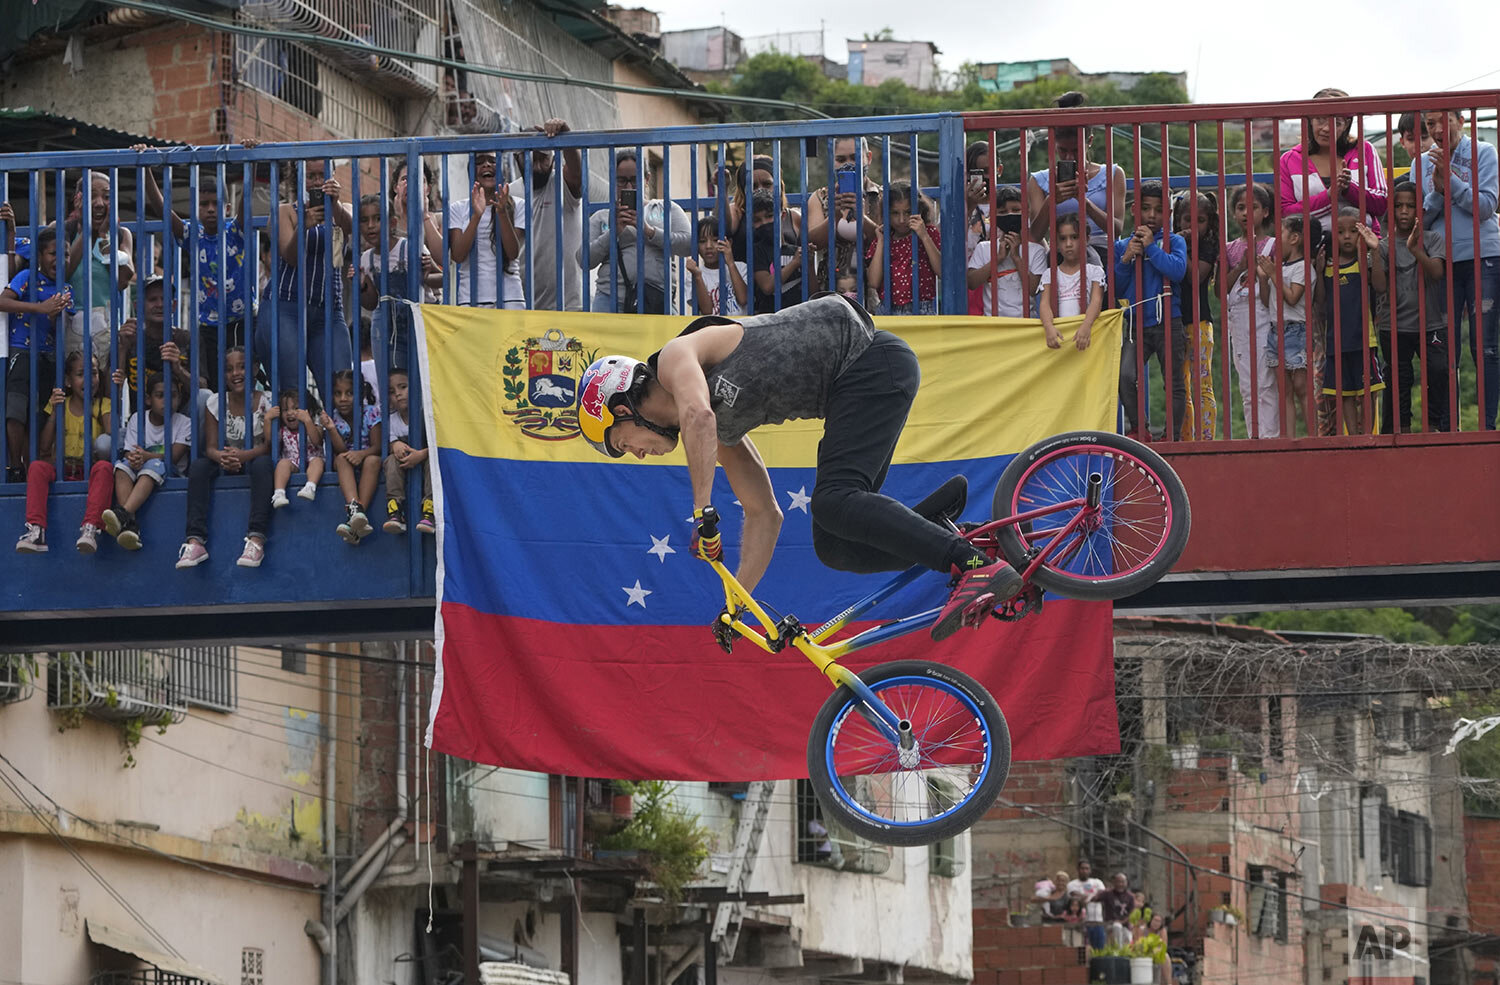  Extreme Barcelona 2020 champion Daniel Dhers, who won a silver medal in the Tokyo Olympics’ debut of BMX Freestyle, gives an exhibition in Caracas, Venezuela, Aug. 14, 2021. (AP Photo/Ariana Cubillos) 